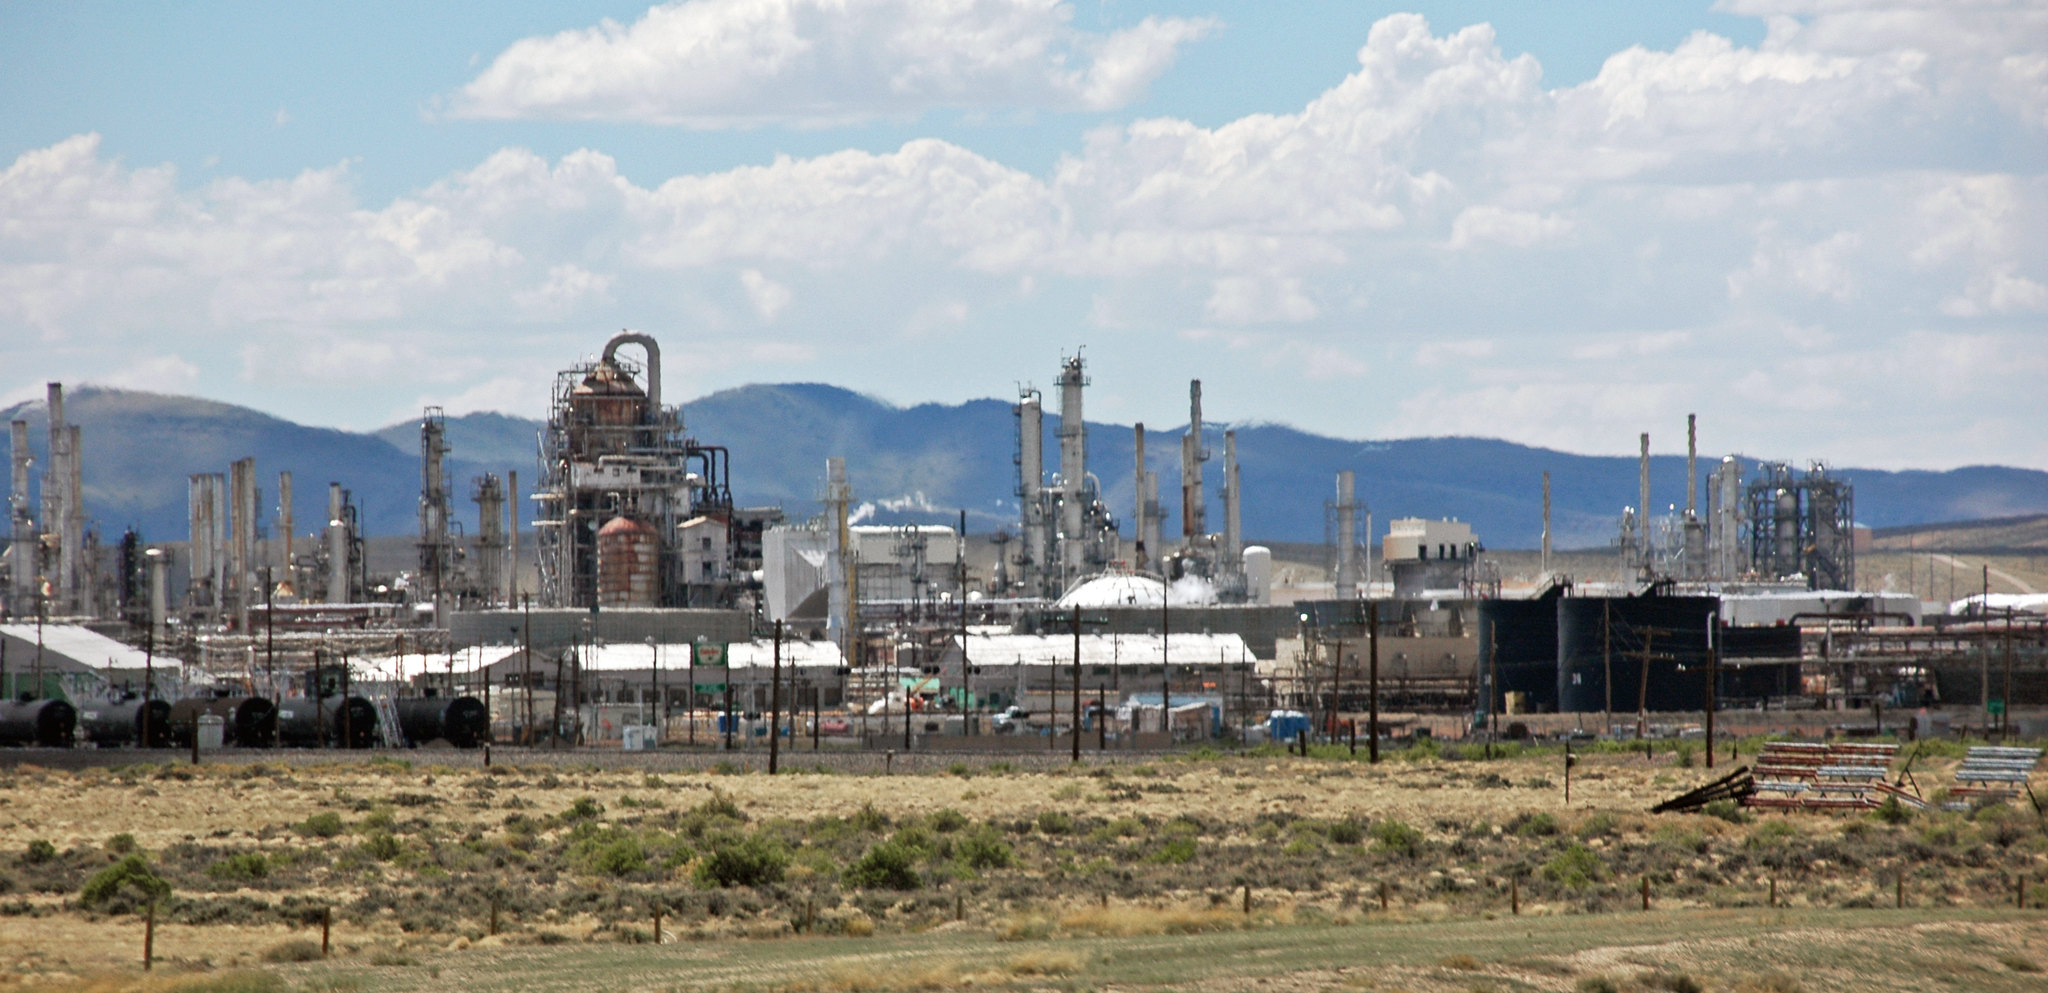 Photograph of the Sinclair oil refinery, Sinclair, Wyoming. The photo shows a cluster of structures in a flat field with hills rising in the background. The sky is blue with scattered clouds.